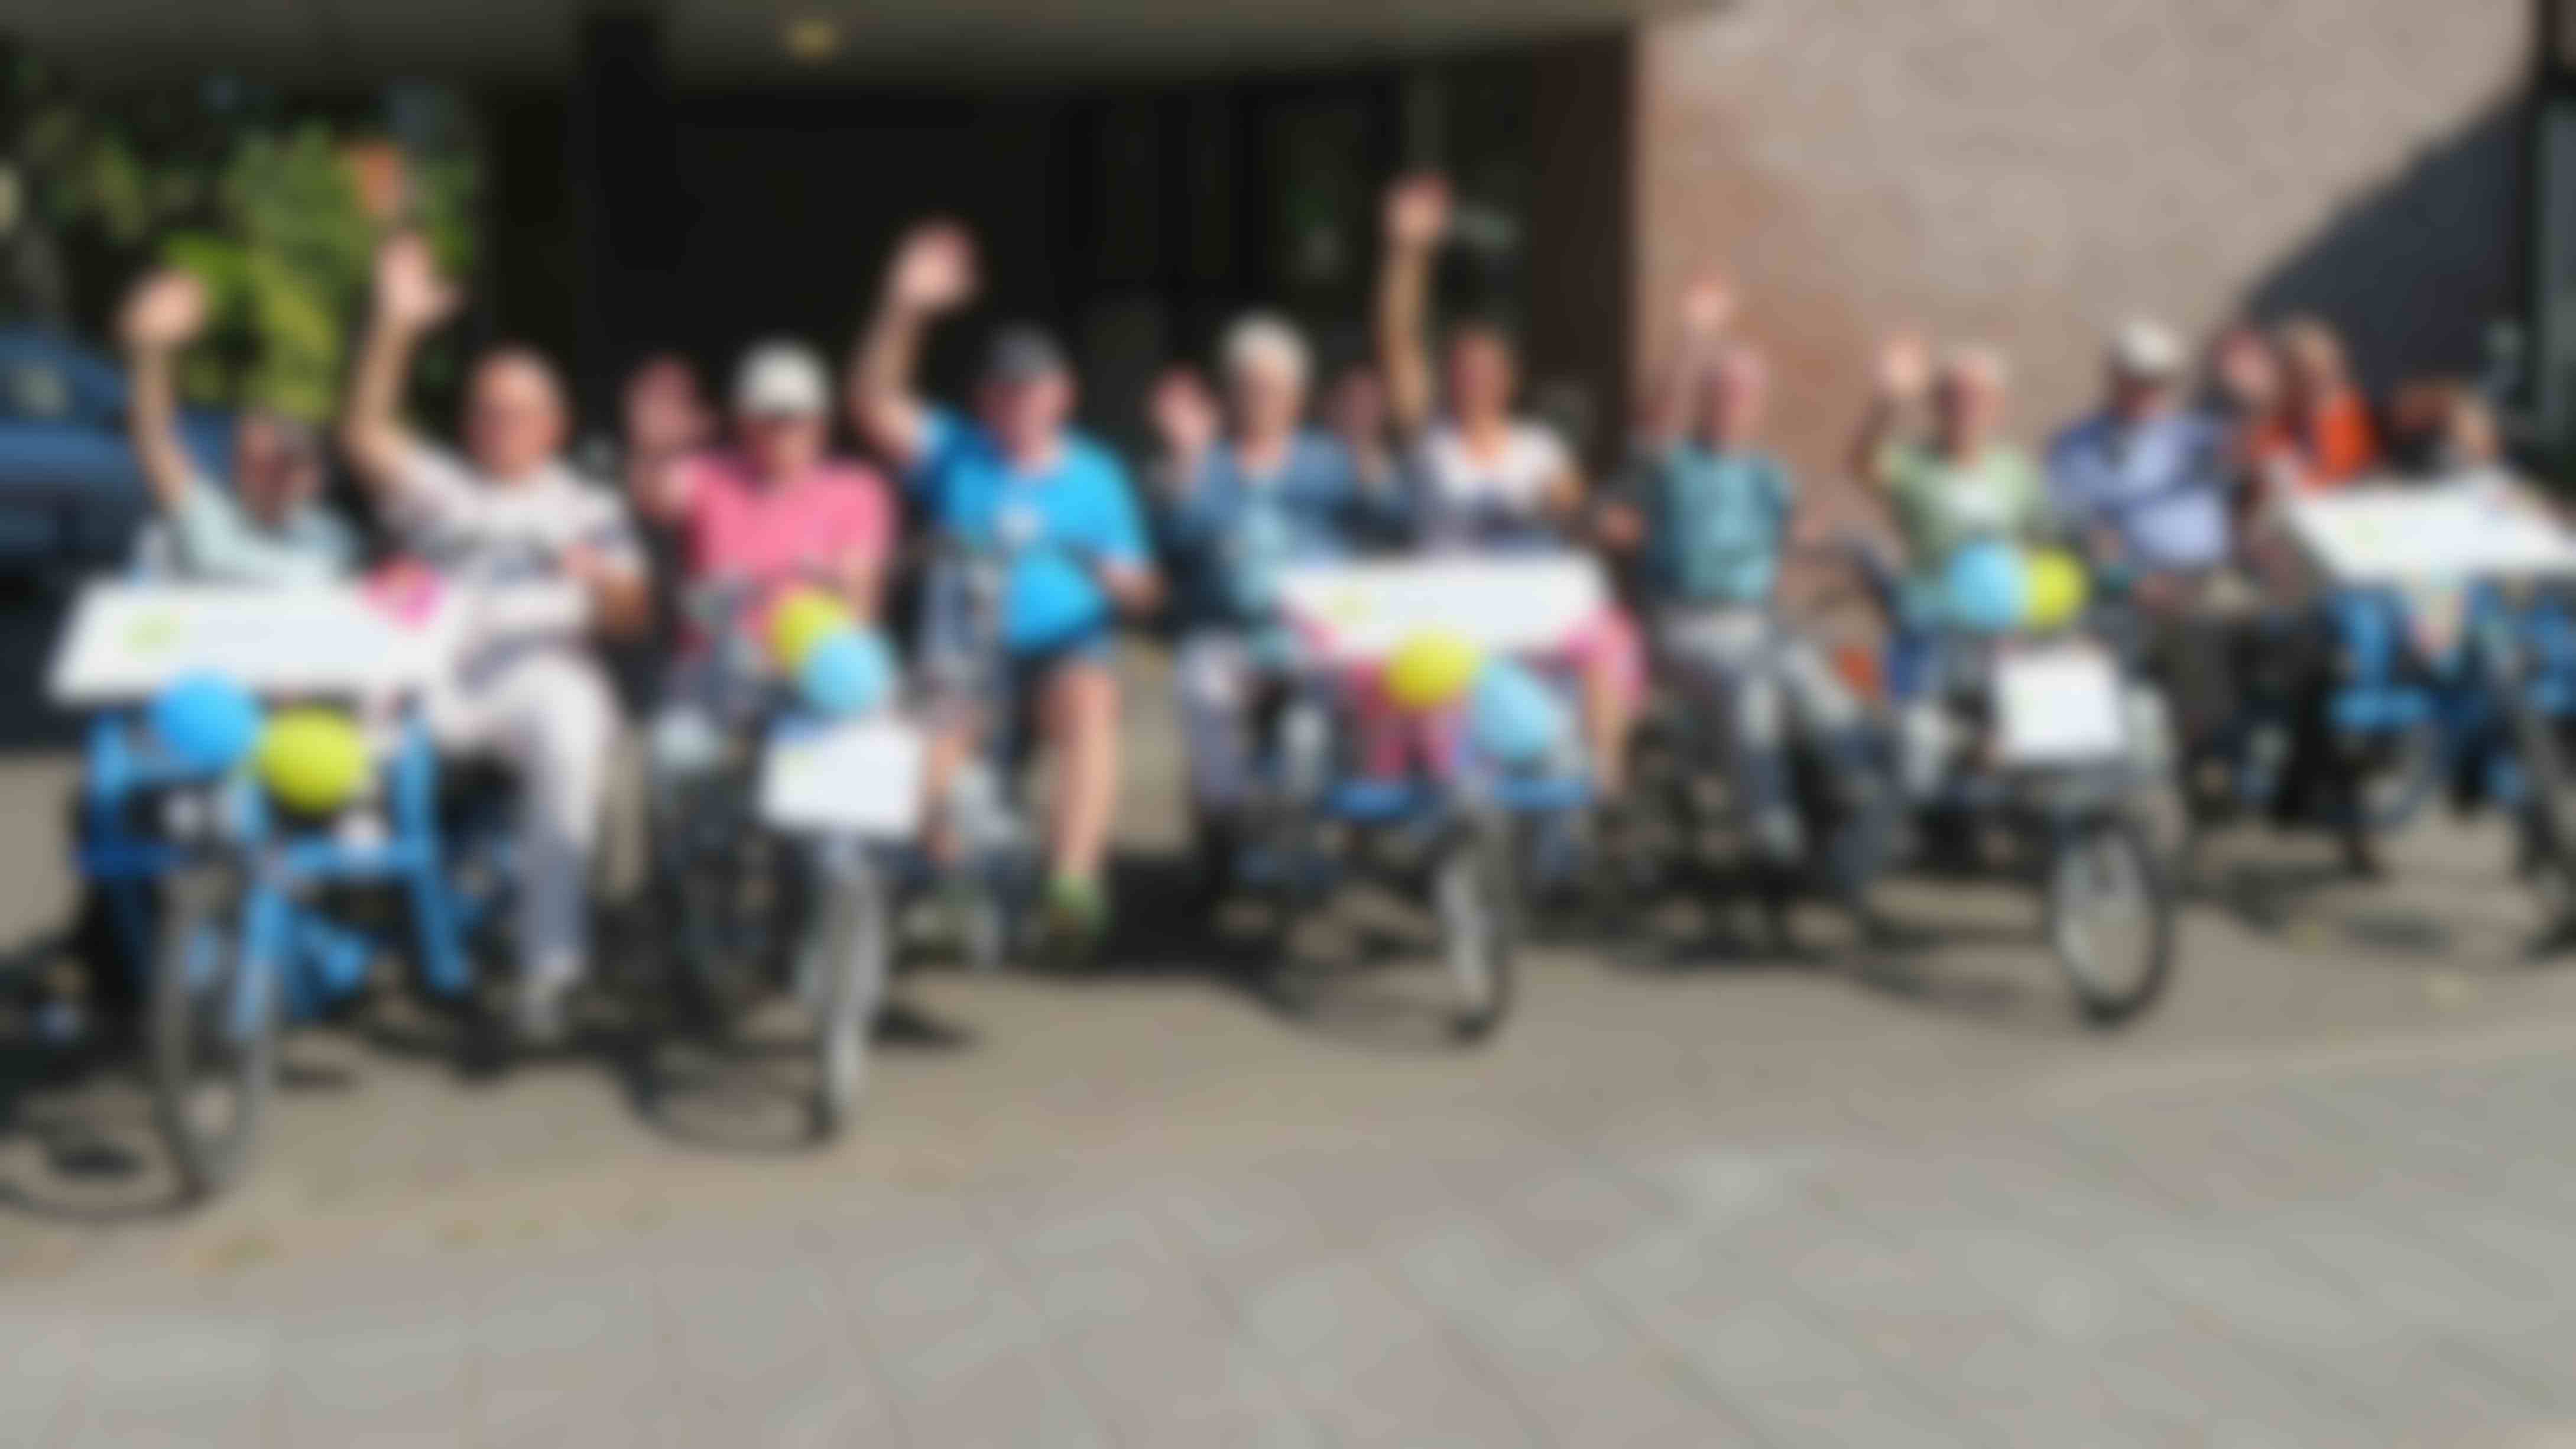 Cycling buddies Apeldoorn and surrounding areas is expanding: Volunteers wanted for team South